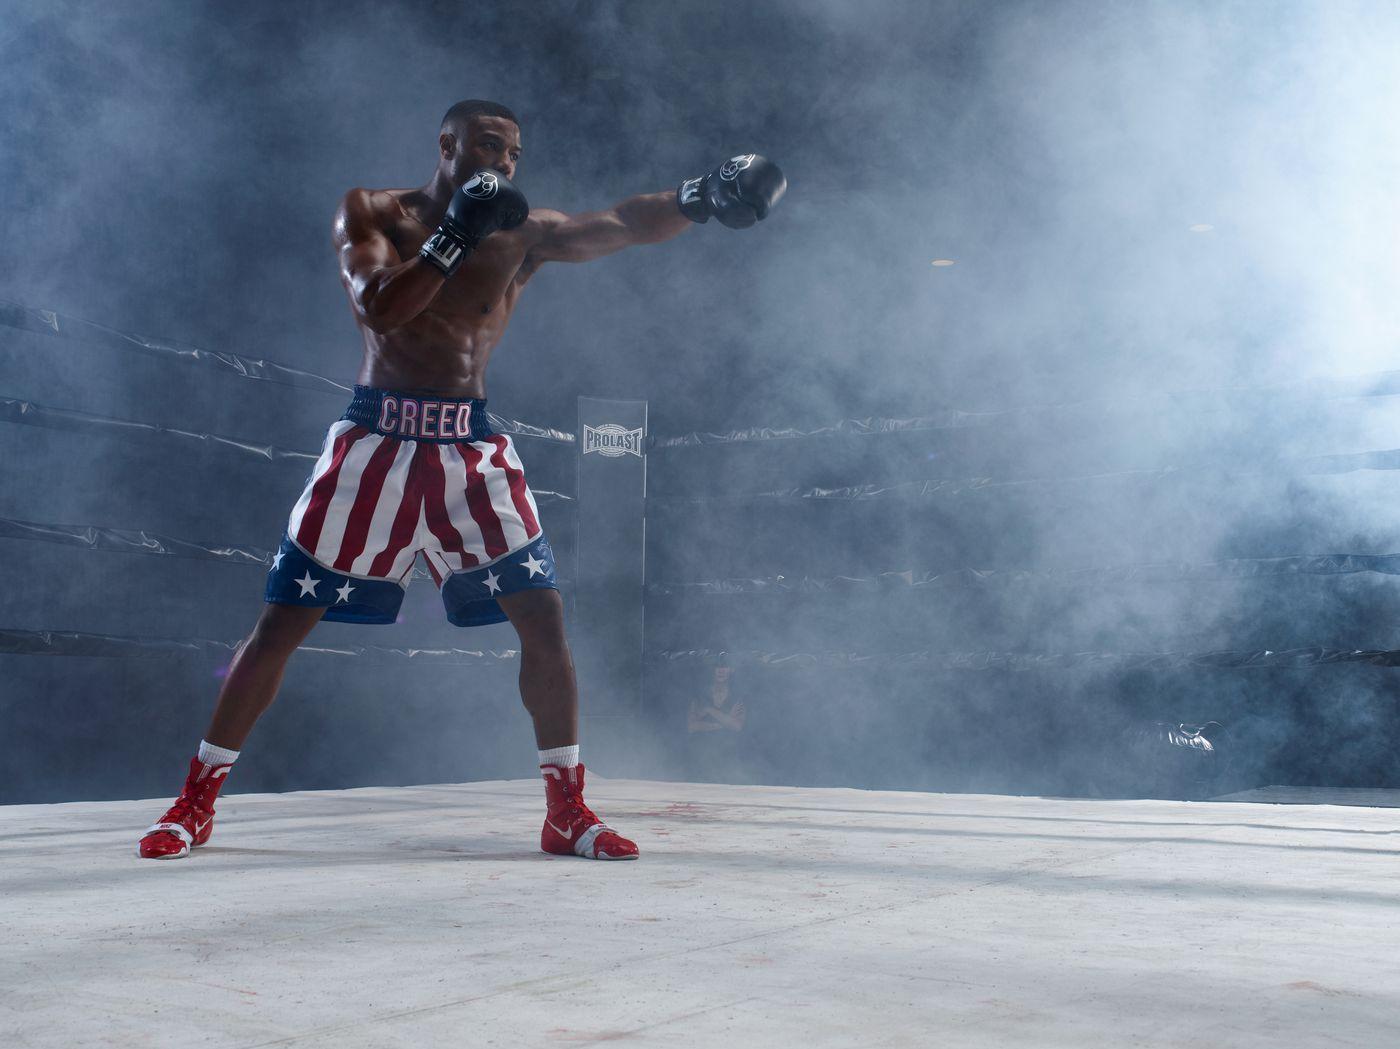 Creed Ii Re Mired In Decades Of Rocky Lore But Still Pretty